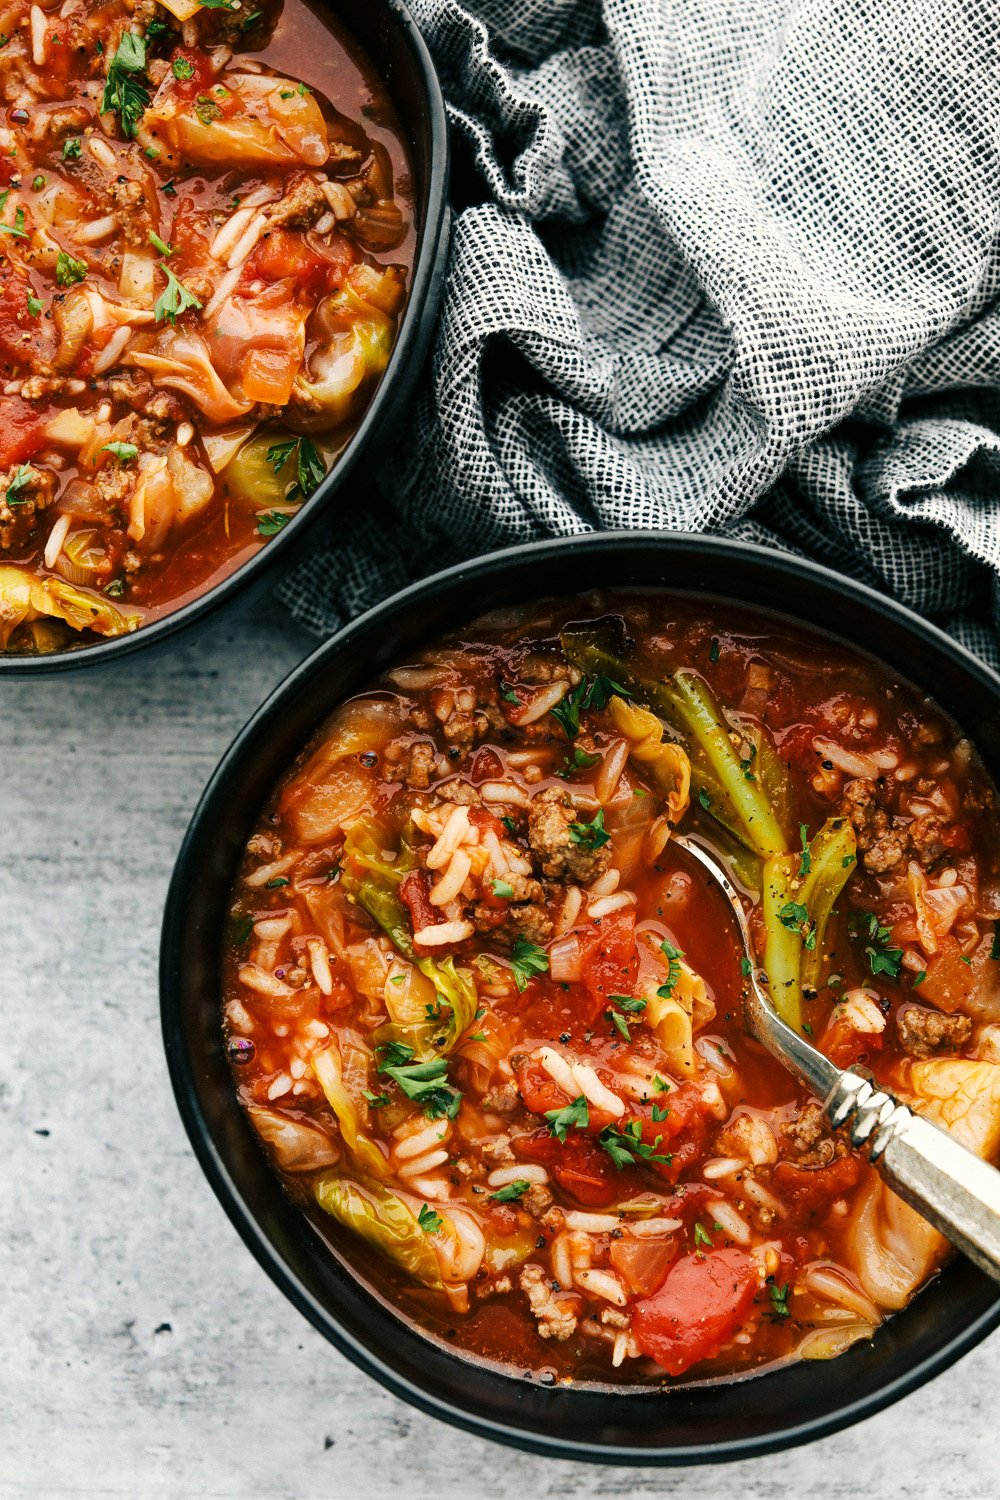 Hearty, rich and satisfying Stuffed Cabbage Soup.